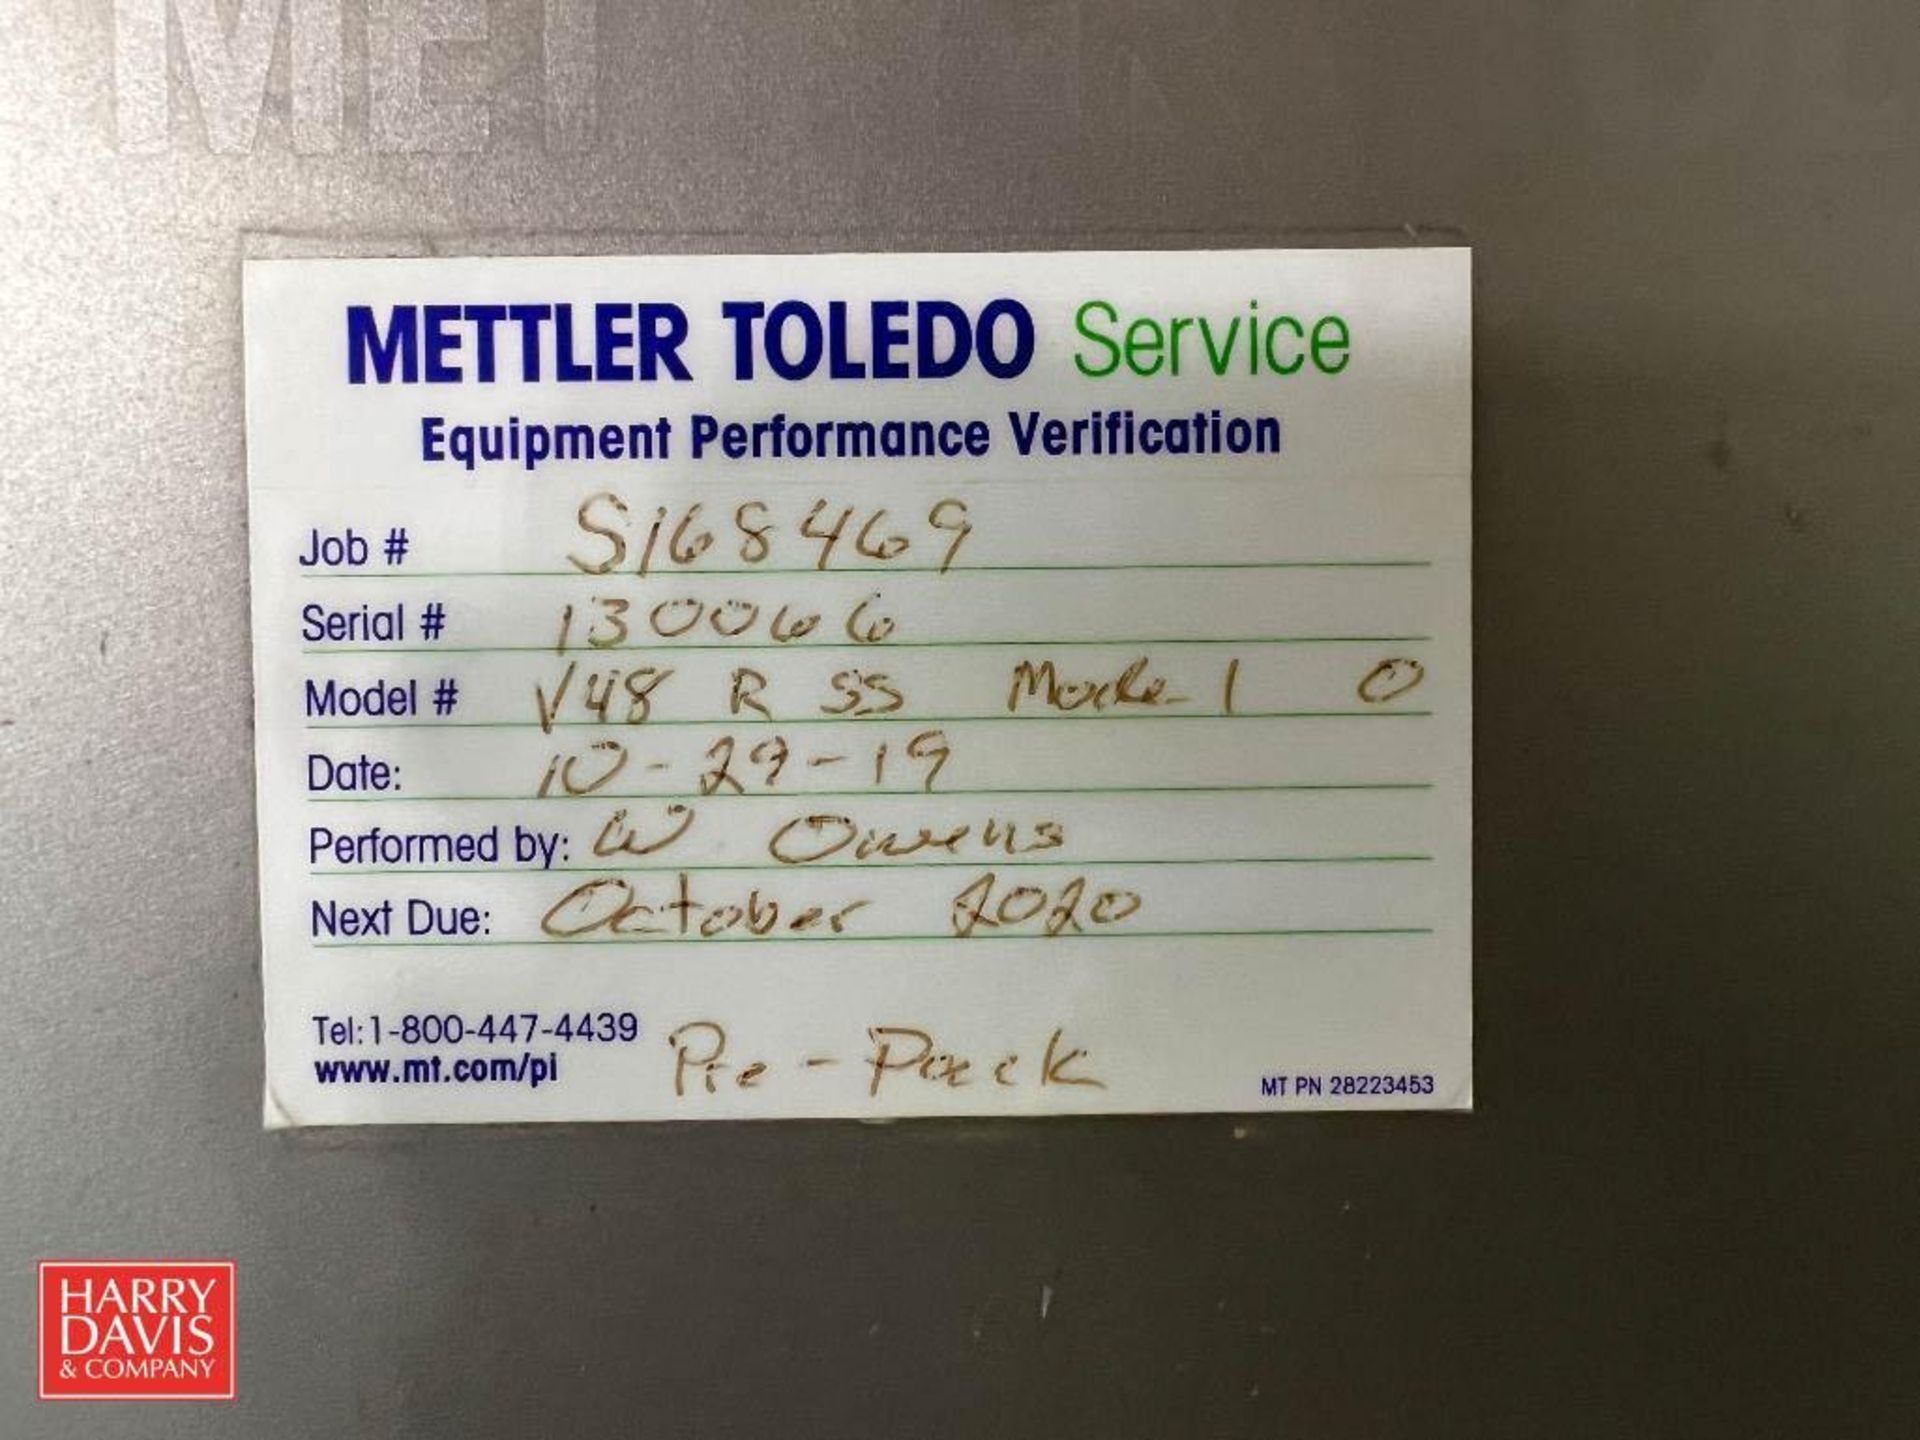 Mettler Toledo Metal Detector, Model: V48 R SS, S/N: 130066 with Touch Screen HMIs, Reject Bar - Image 3 of 3